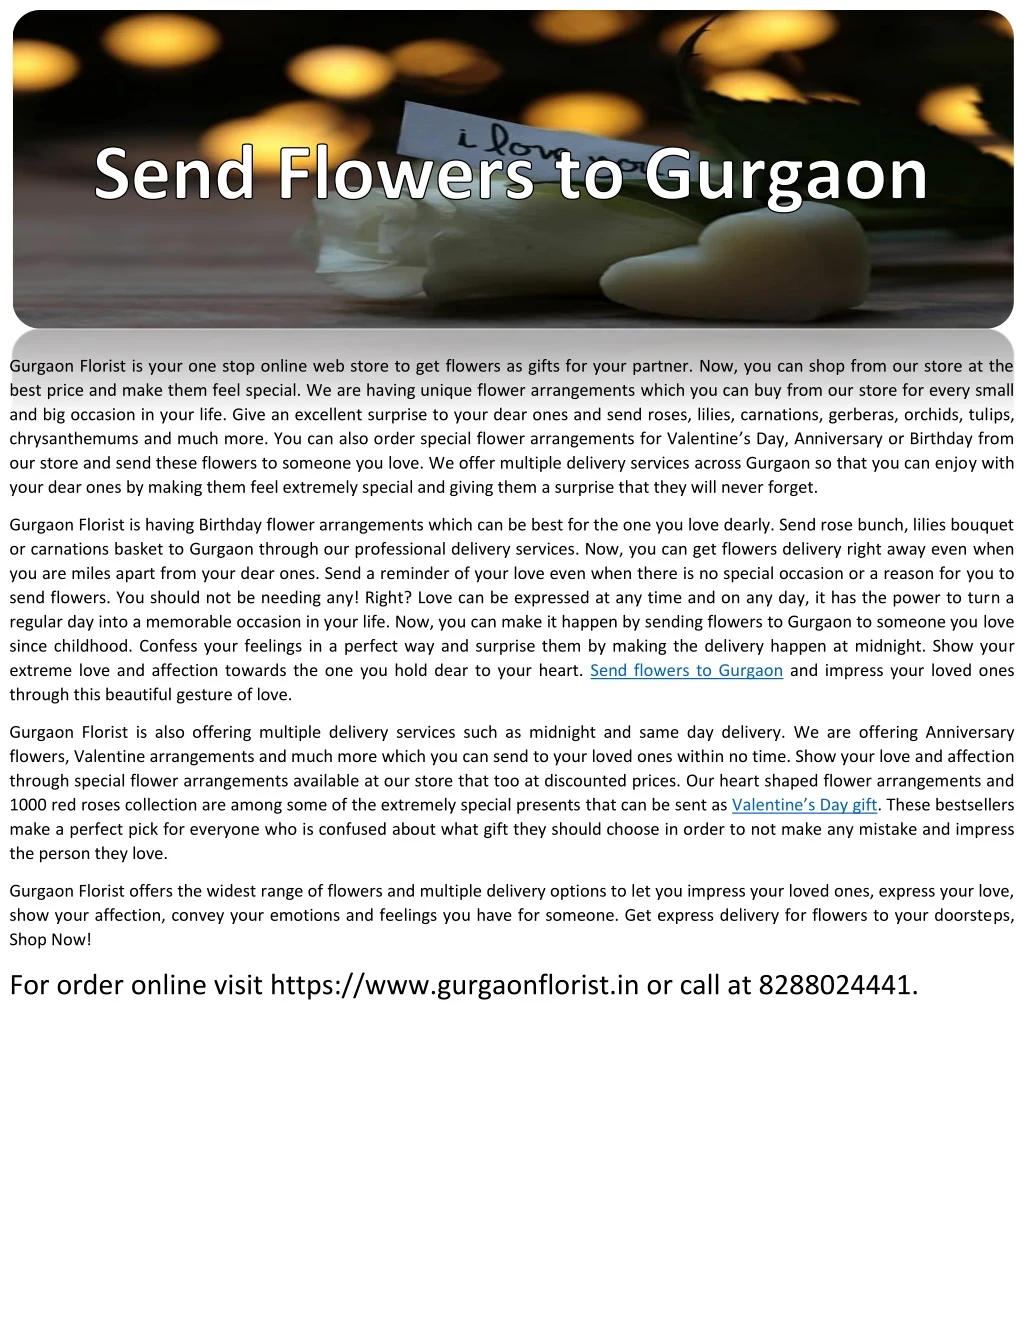 gurgaon florist is your one stop online web store